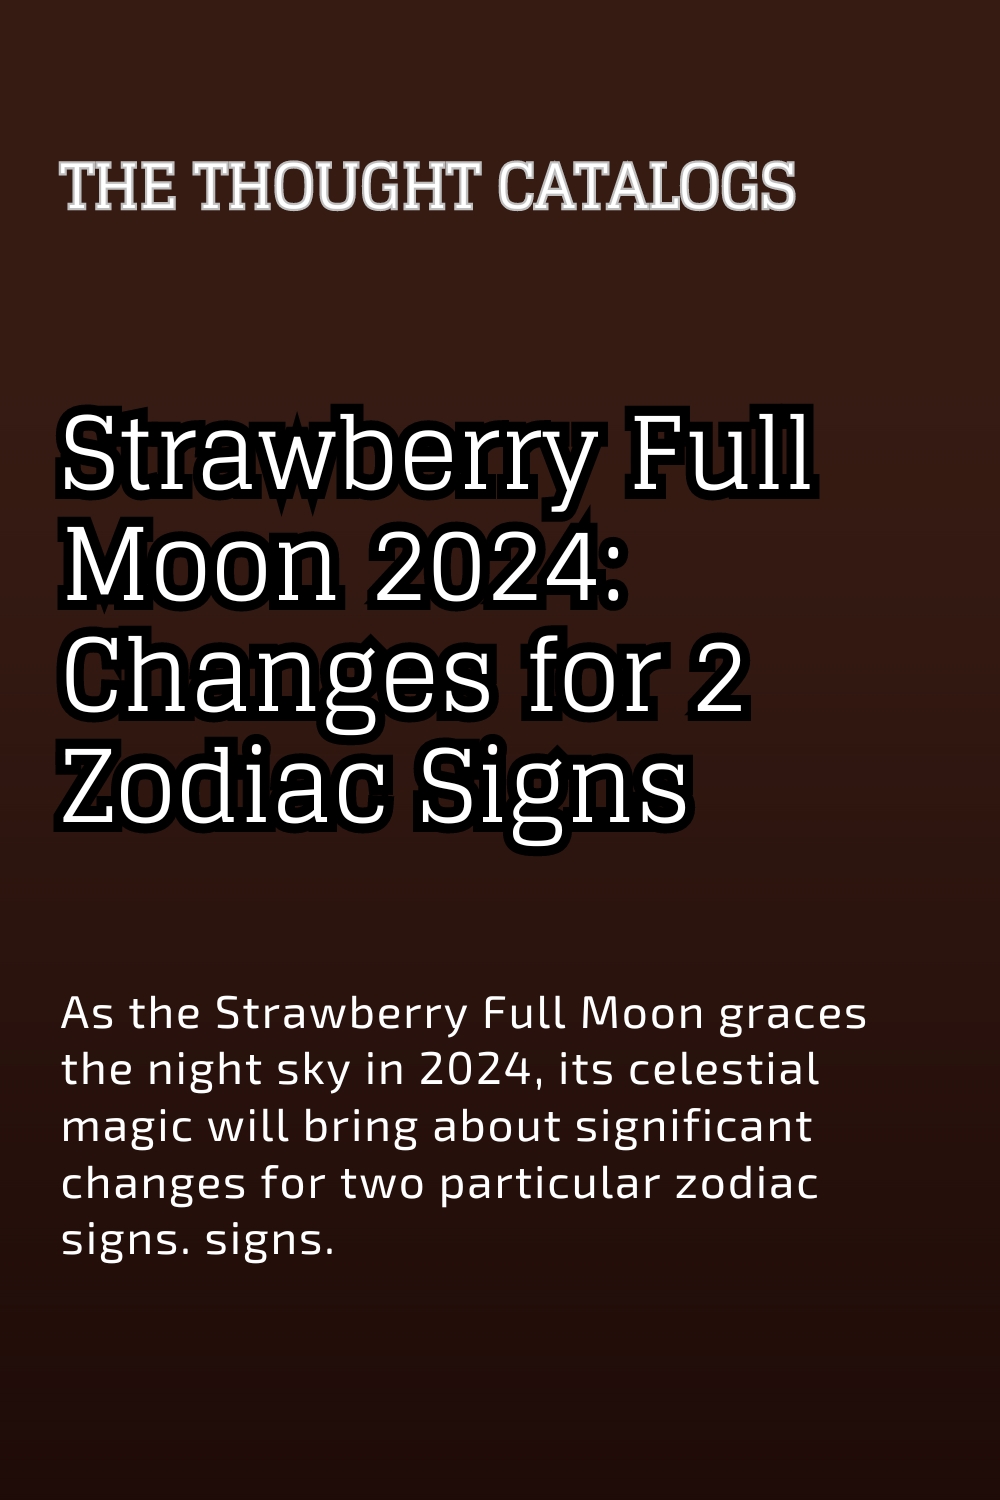 Strawberry Full Moon 2024 Changes for 2 Zodiac Signs